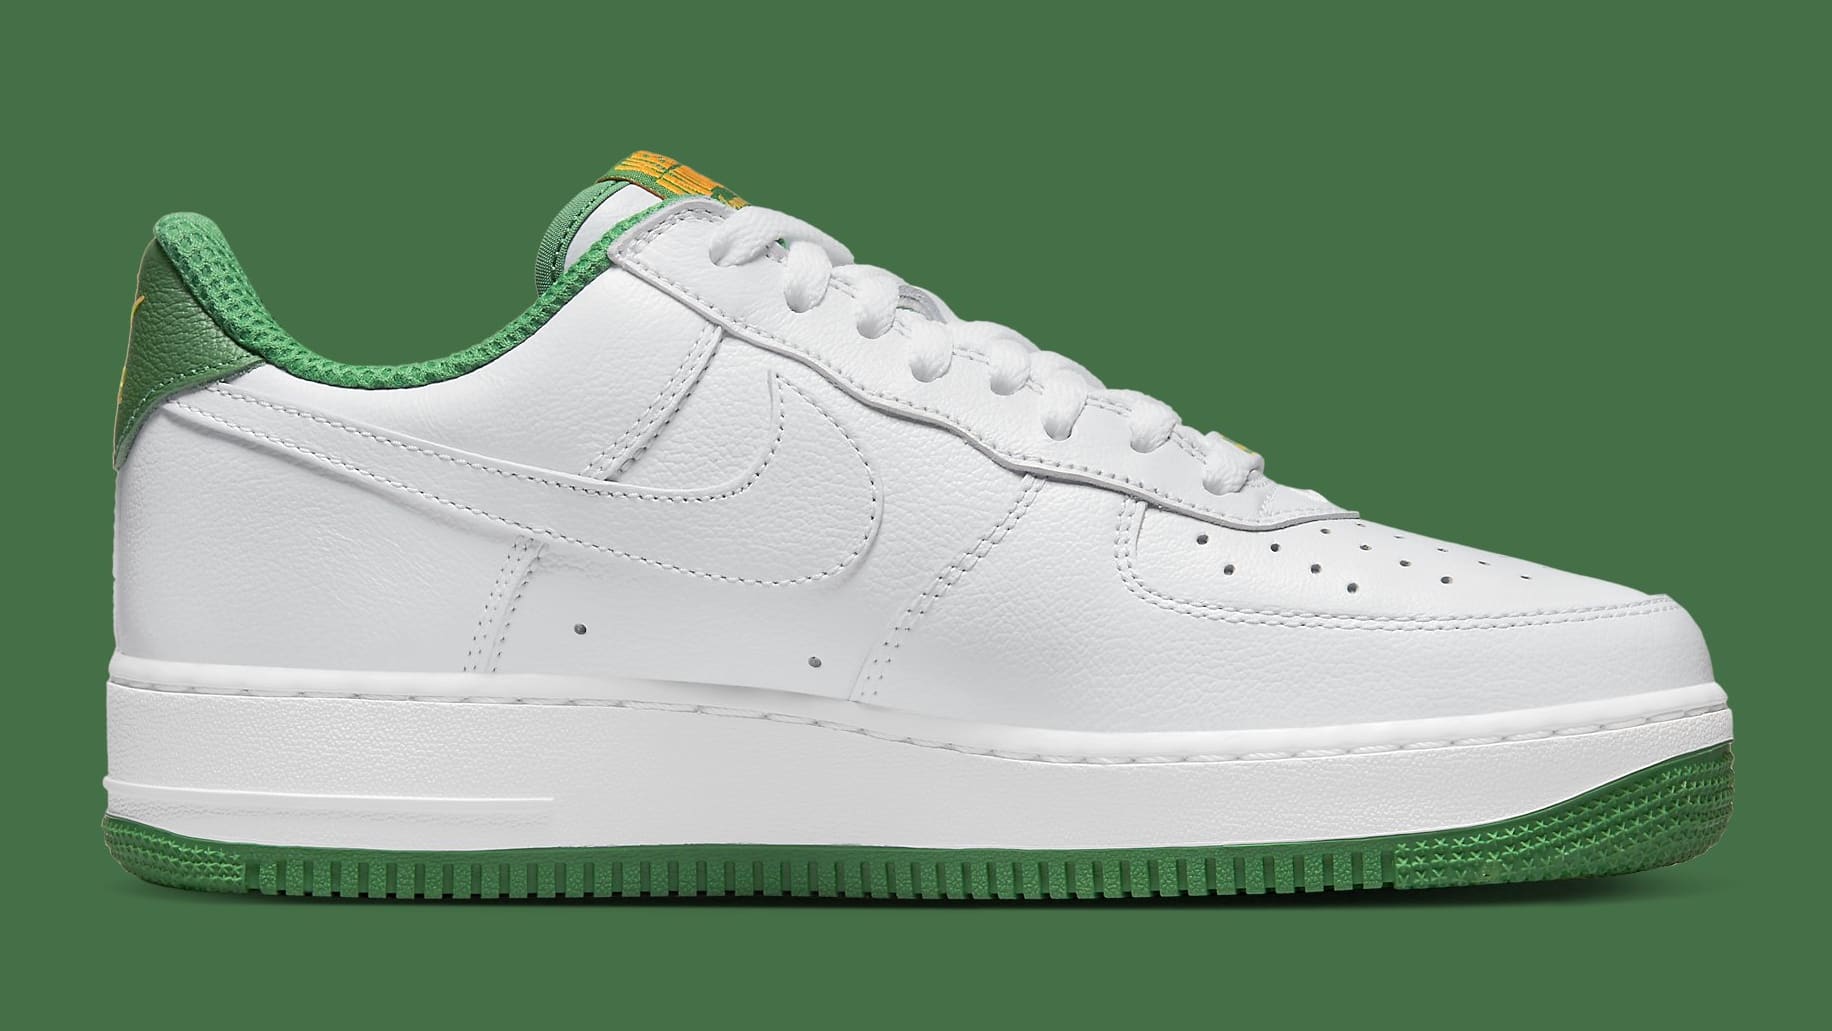 Nike Air Force 1 Low West Indies Release Date DX1156-100 Medial